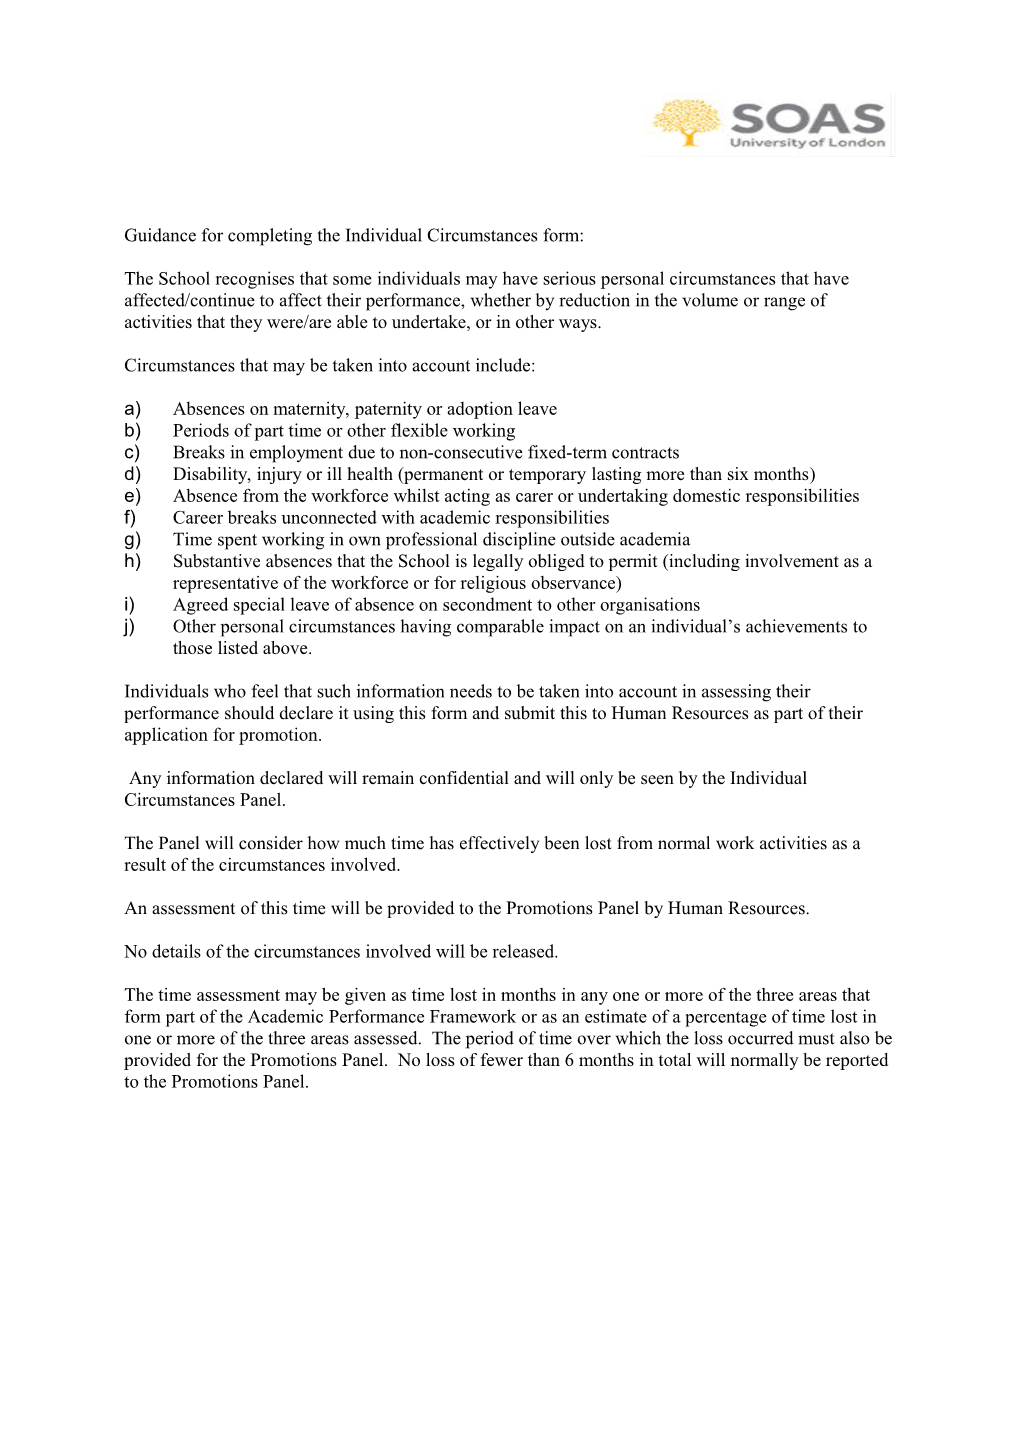 Guidance for Completing the Individual Circumstances Form